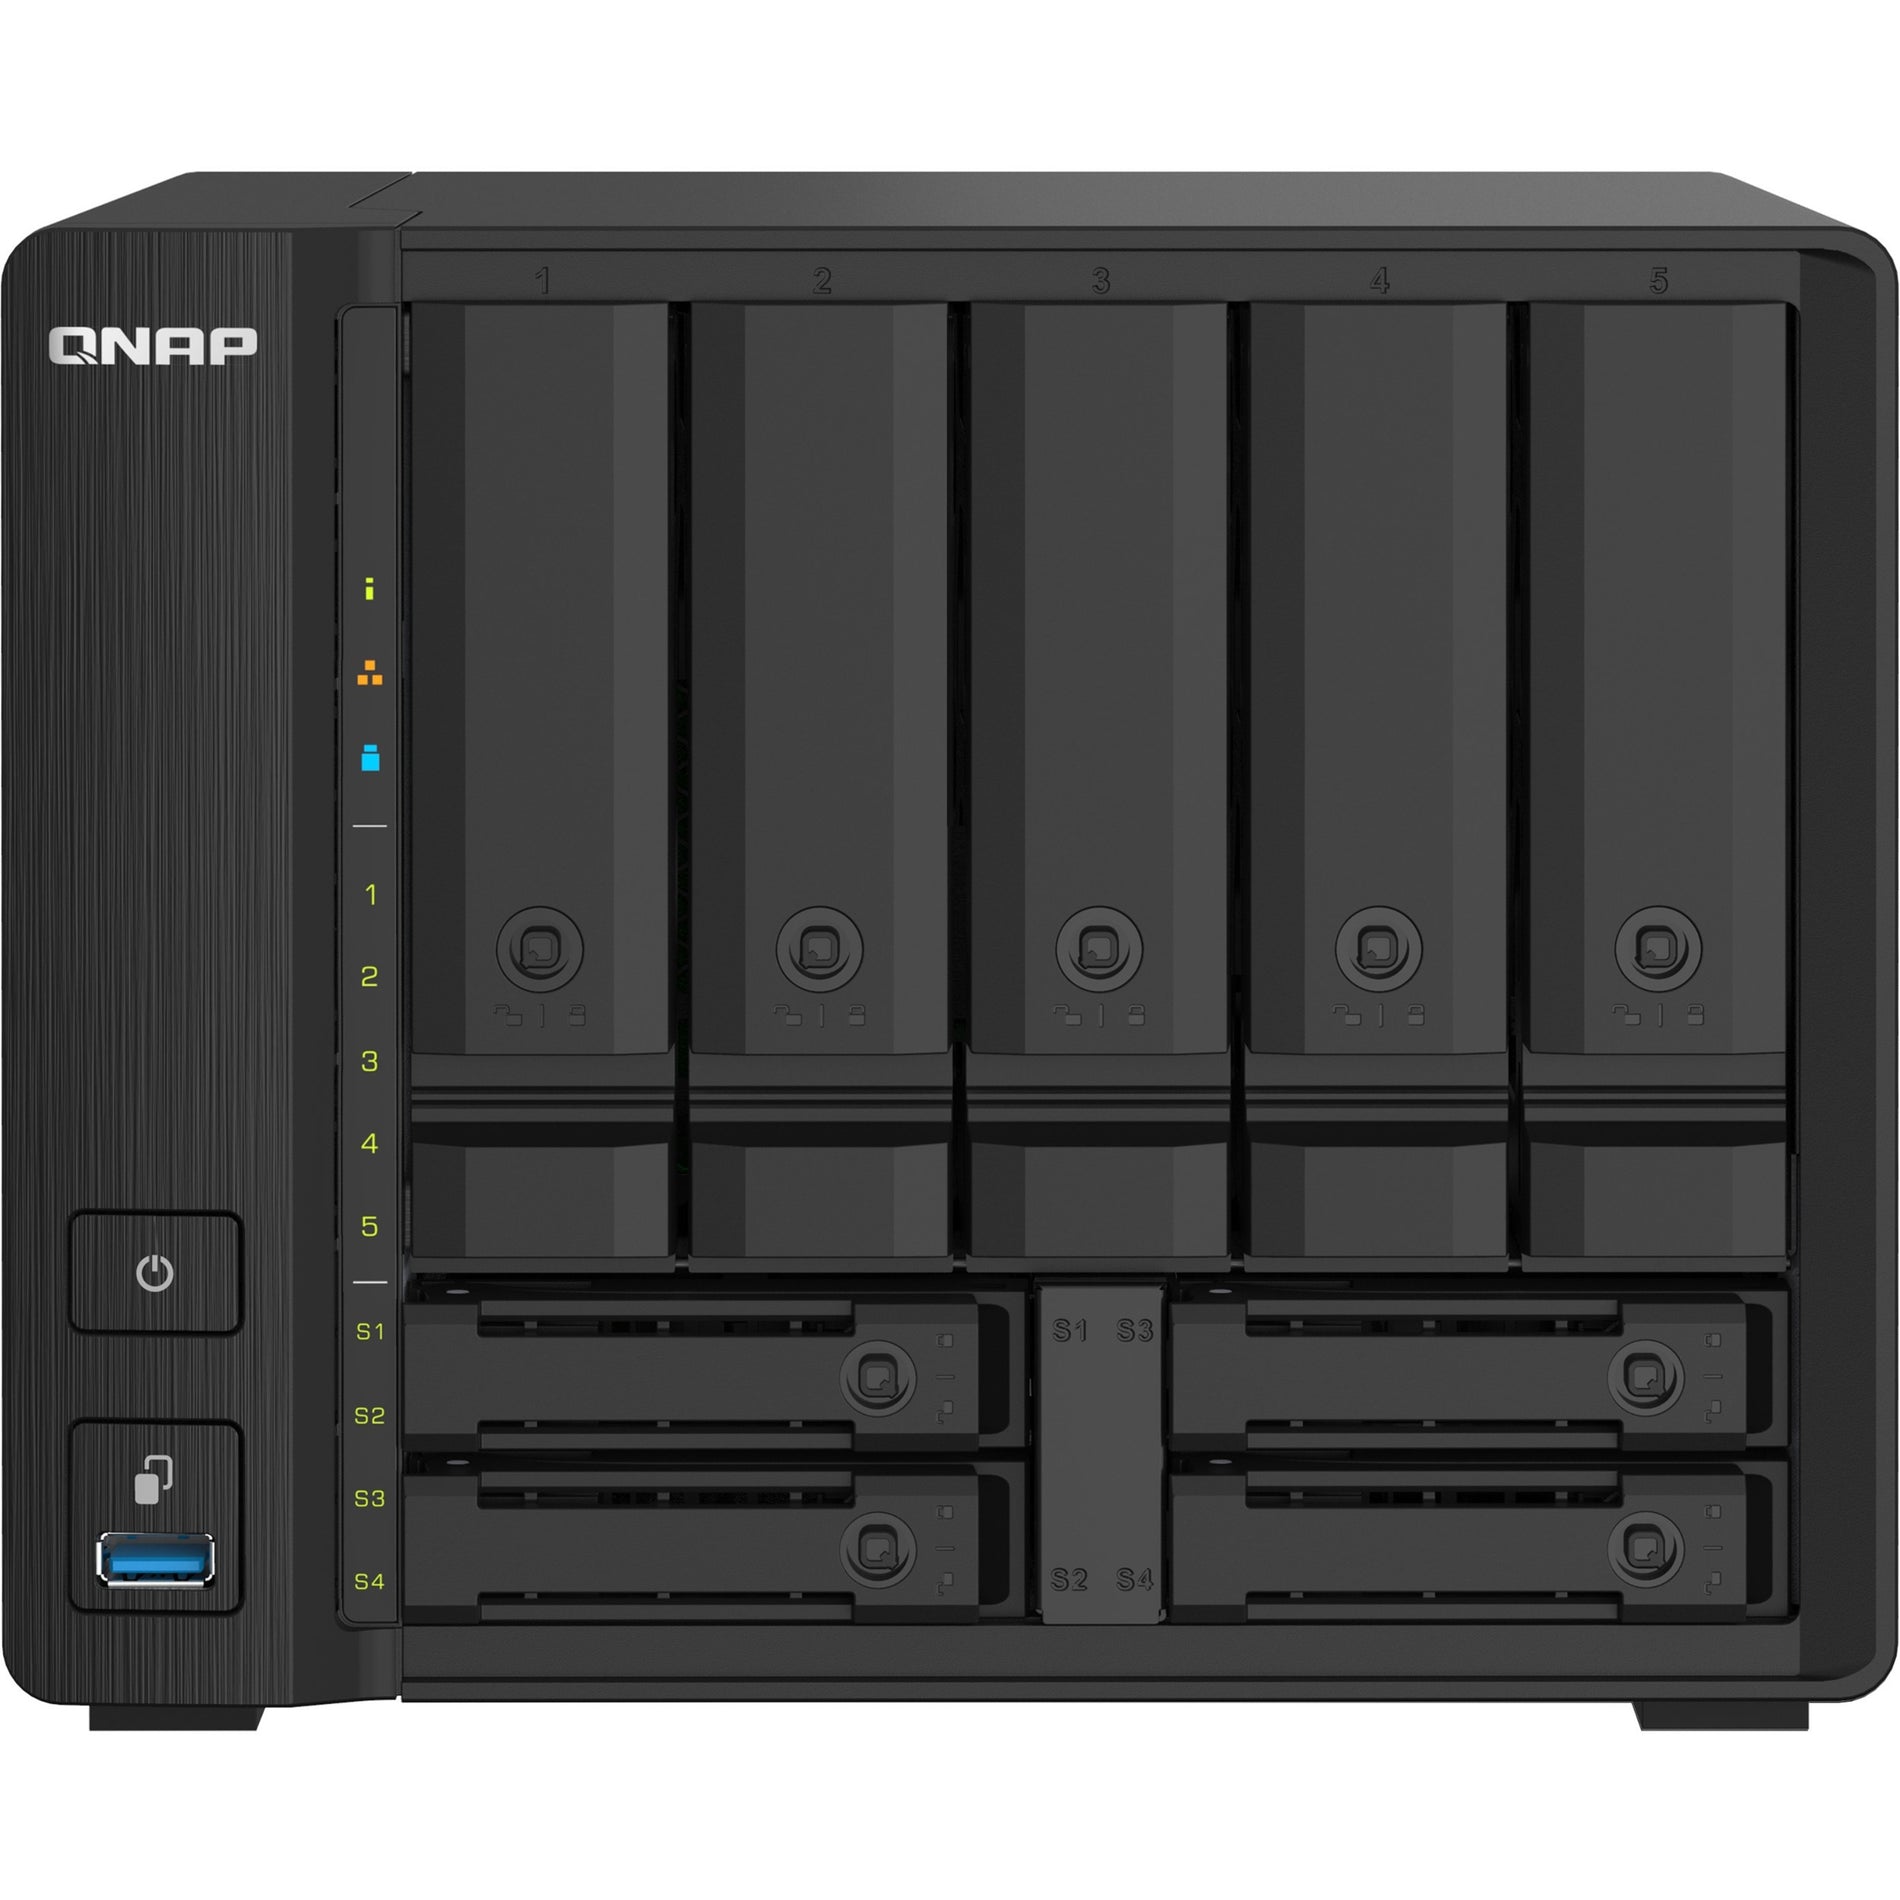 Enjoy smooth wireless streaming with QNAP NAS 